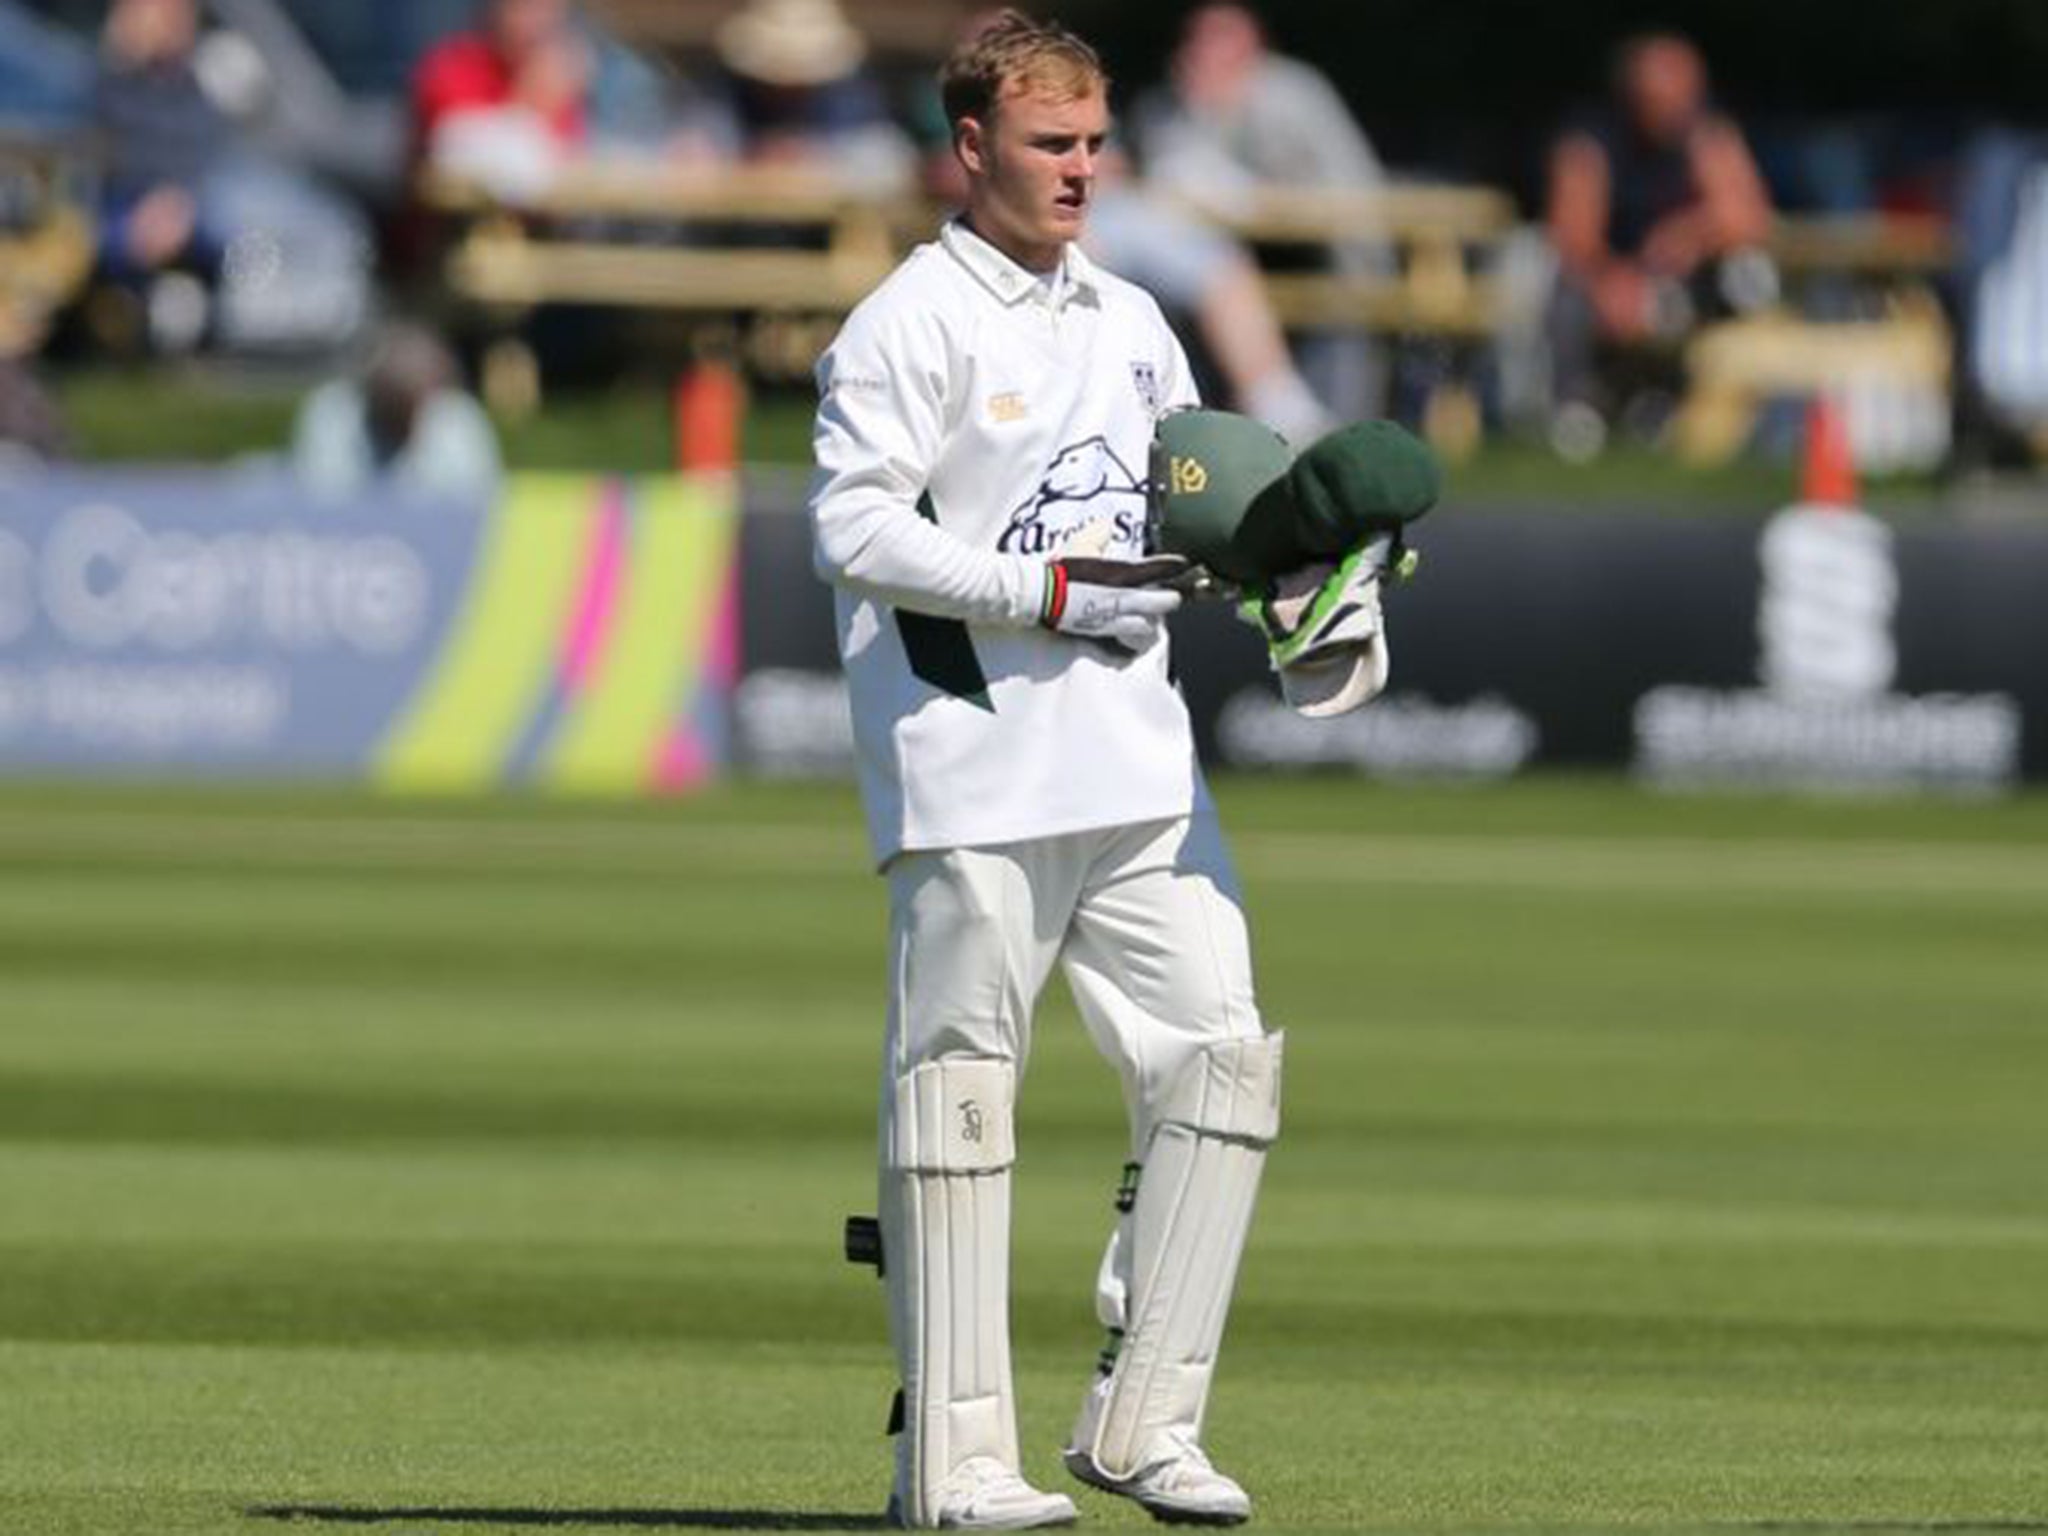 Wicketkeeper Ben Cox struck his second first-class hundred to leave Somerset trailing by 152 runs